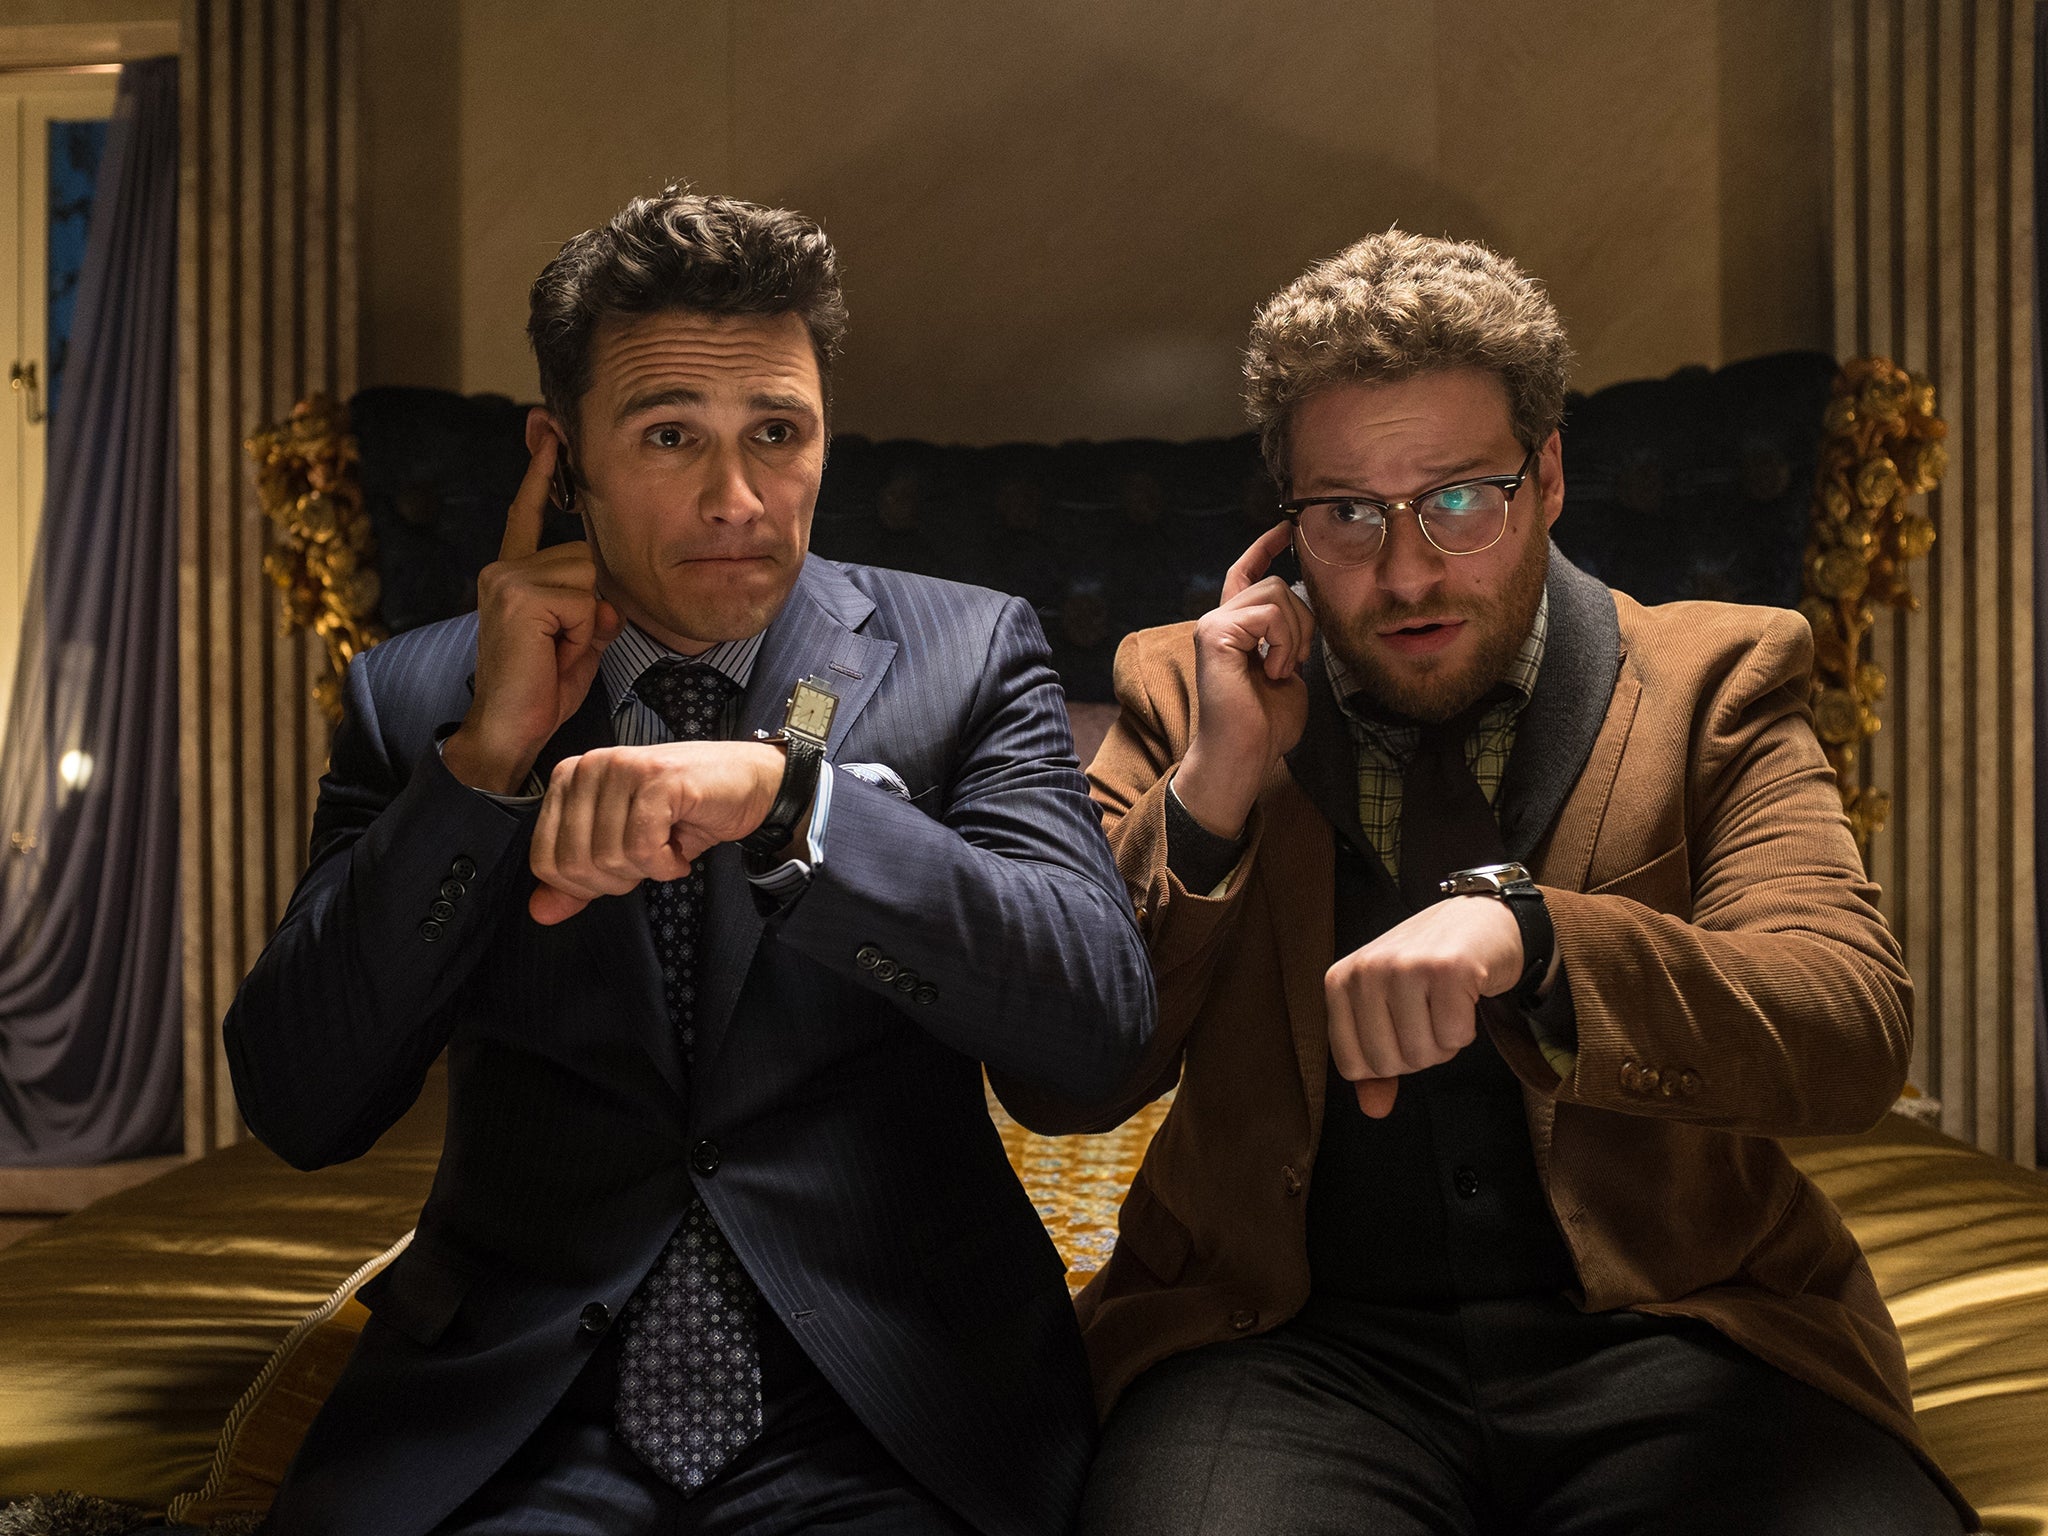 James Franco and Seth Rogen in ‘The Interview’